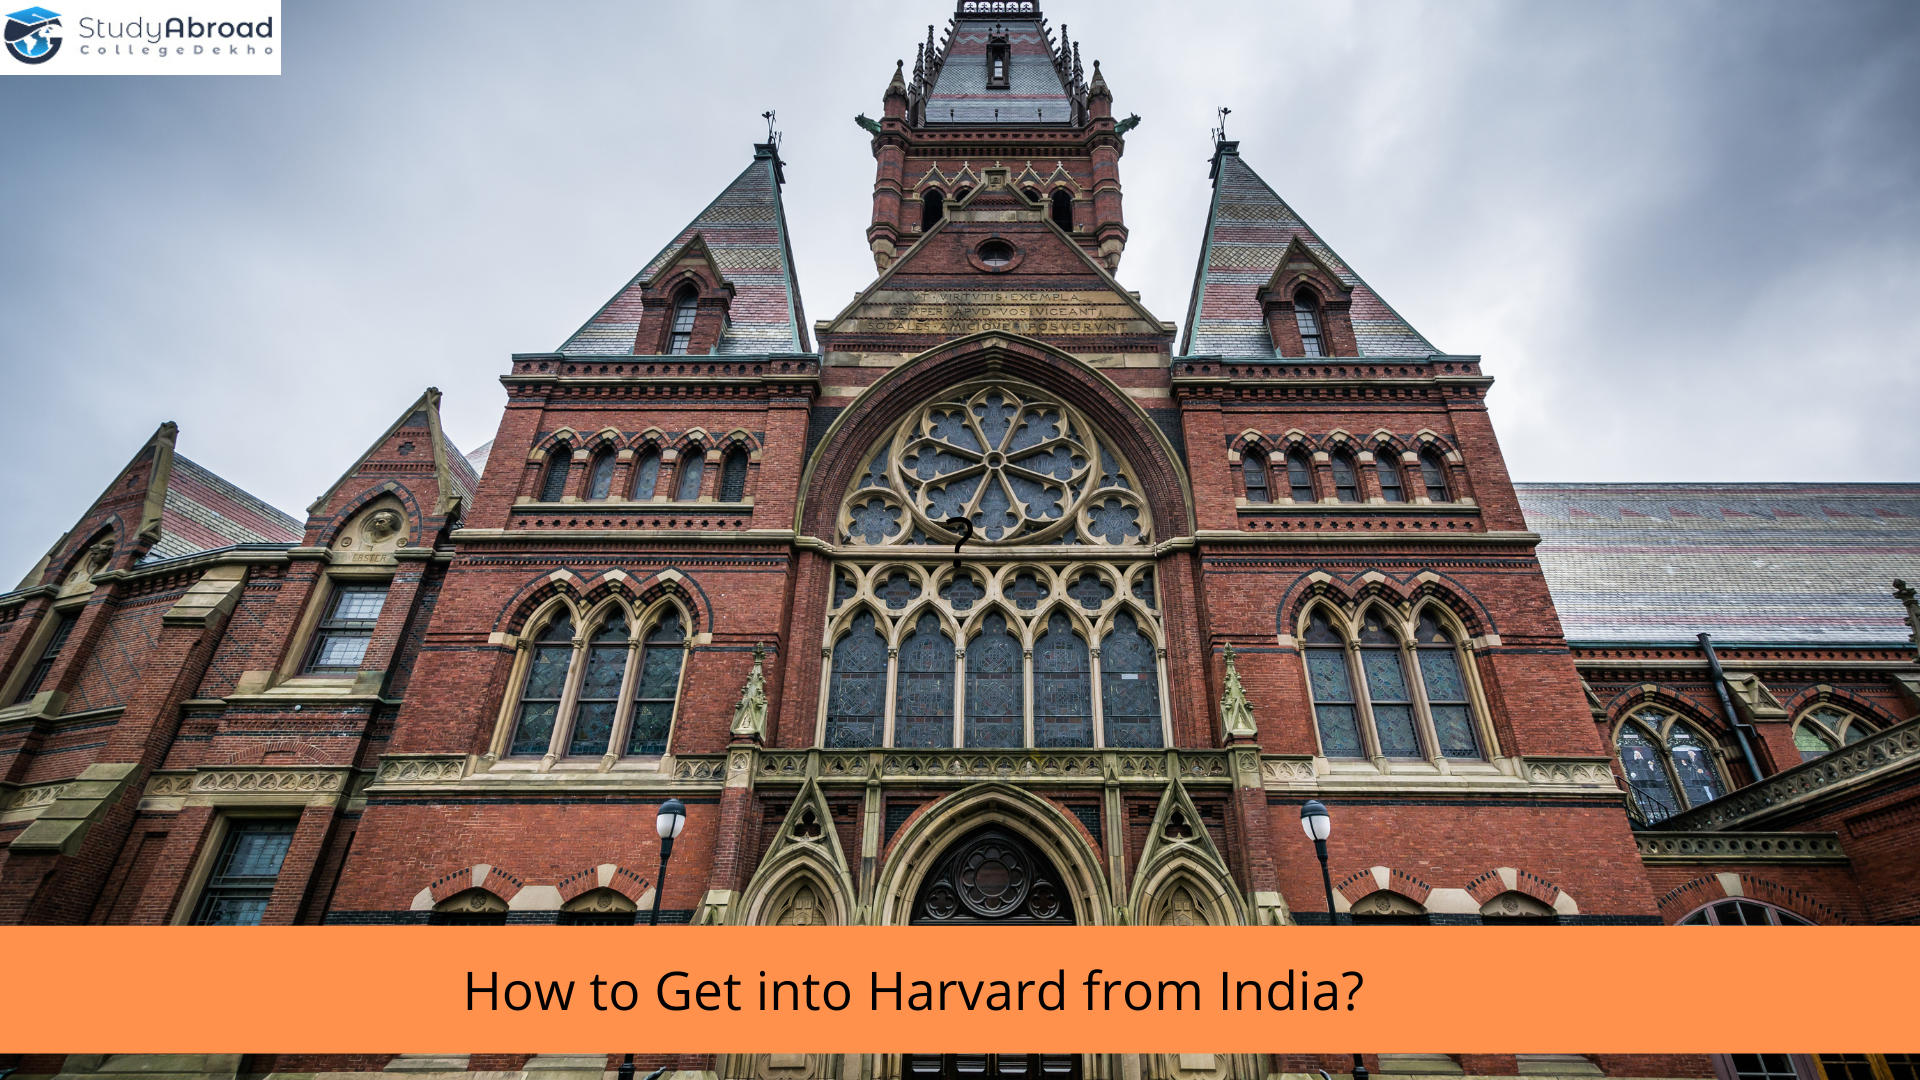 How to Get Admission in Harvard University from India? - Check Process, Eligibility & Scholarship Details